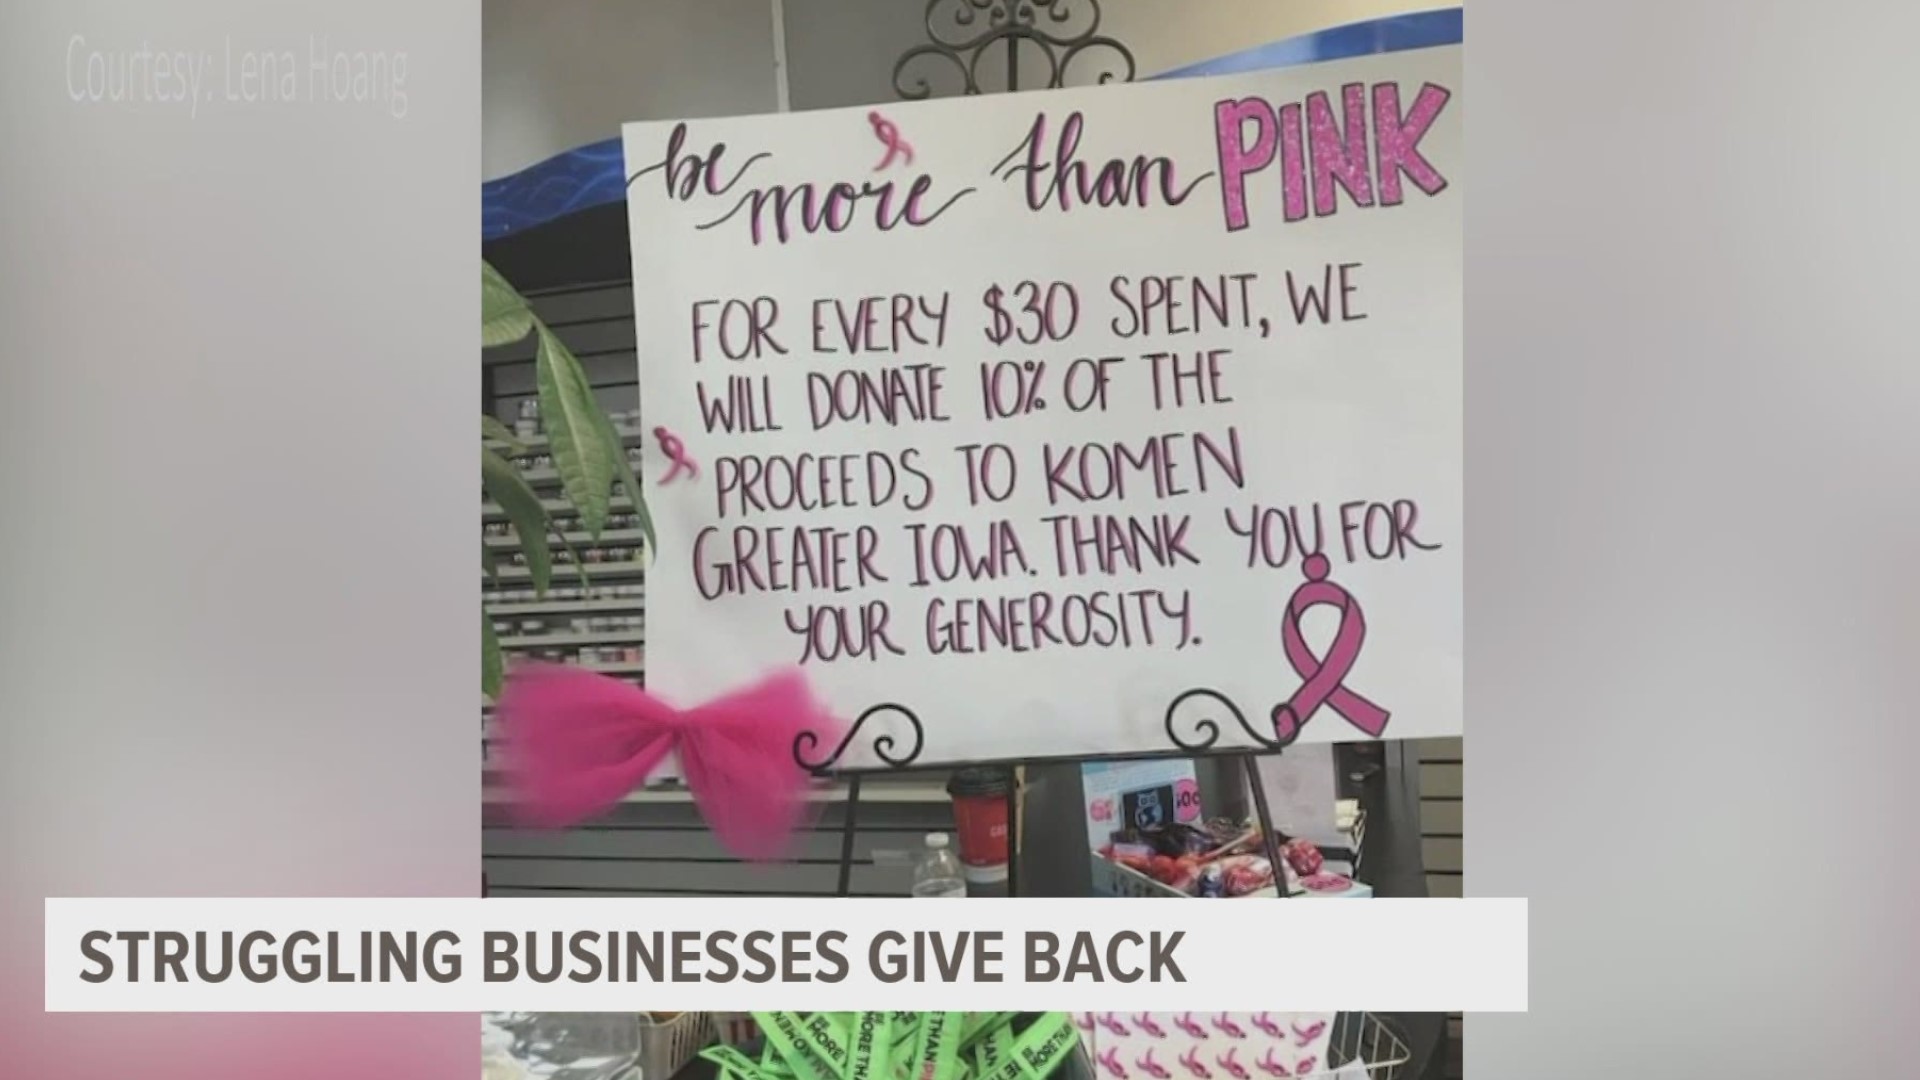 The owner of Urban Nails and Spa said her sales are down 40 to 45 percent, but she donated a portion of her sales to the Susan G. Komen foundation.